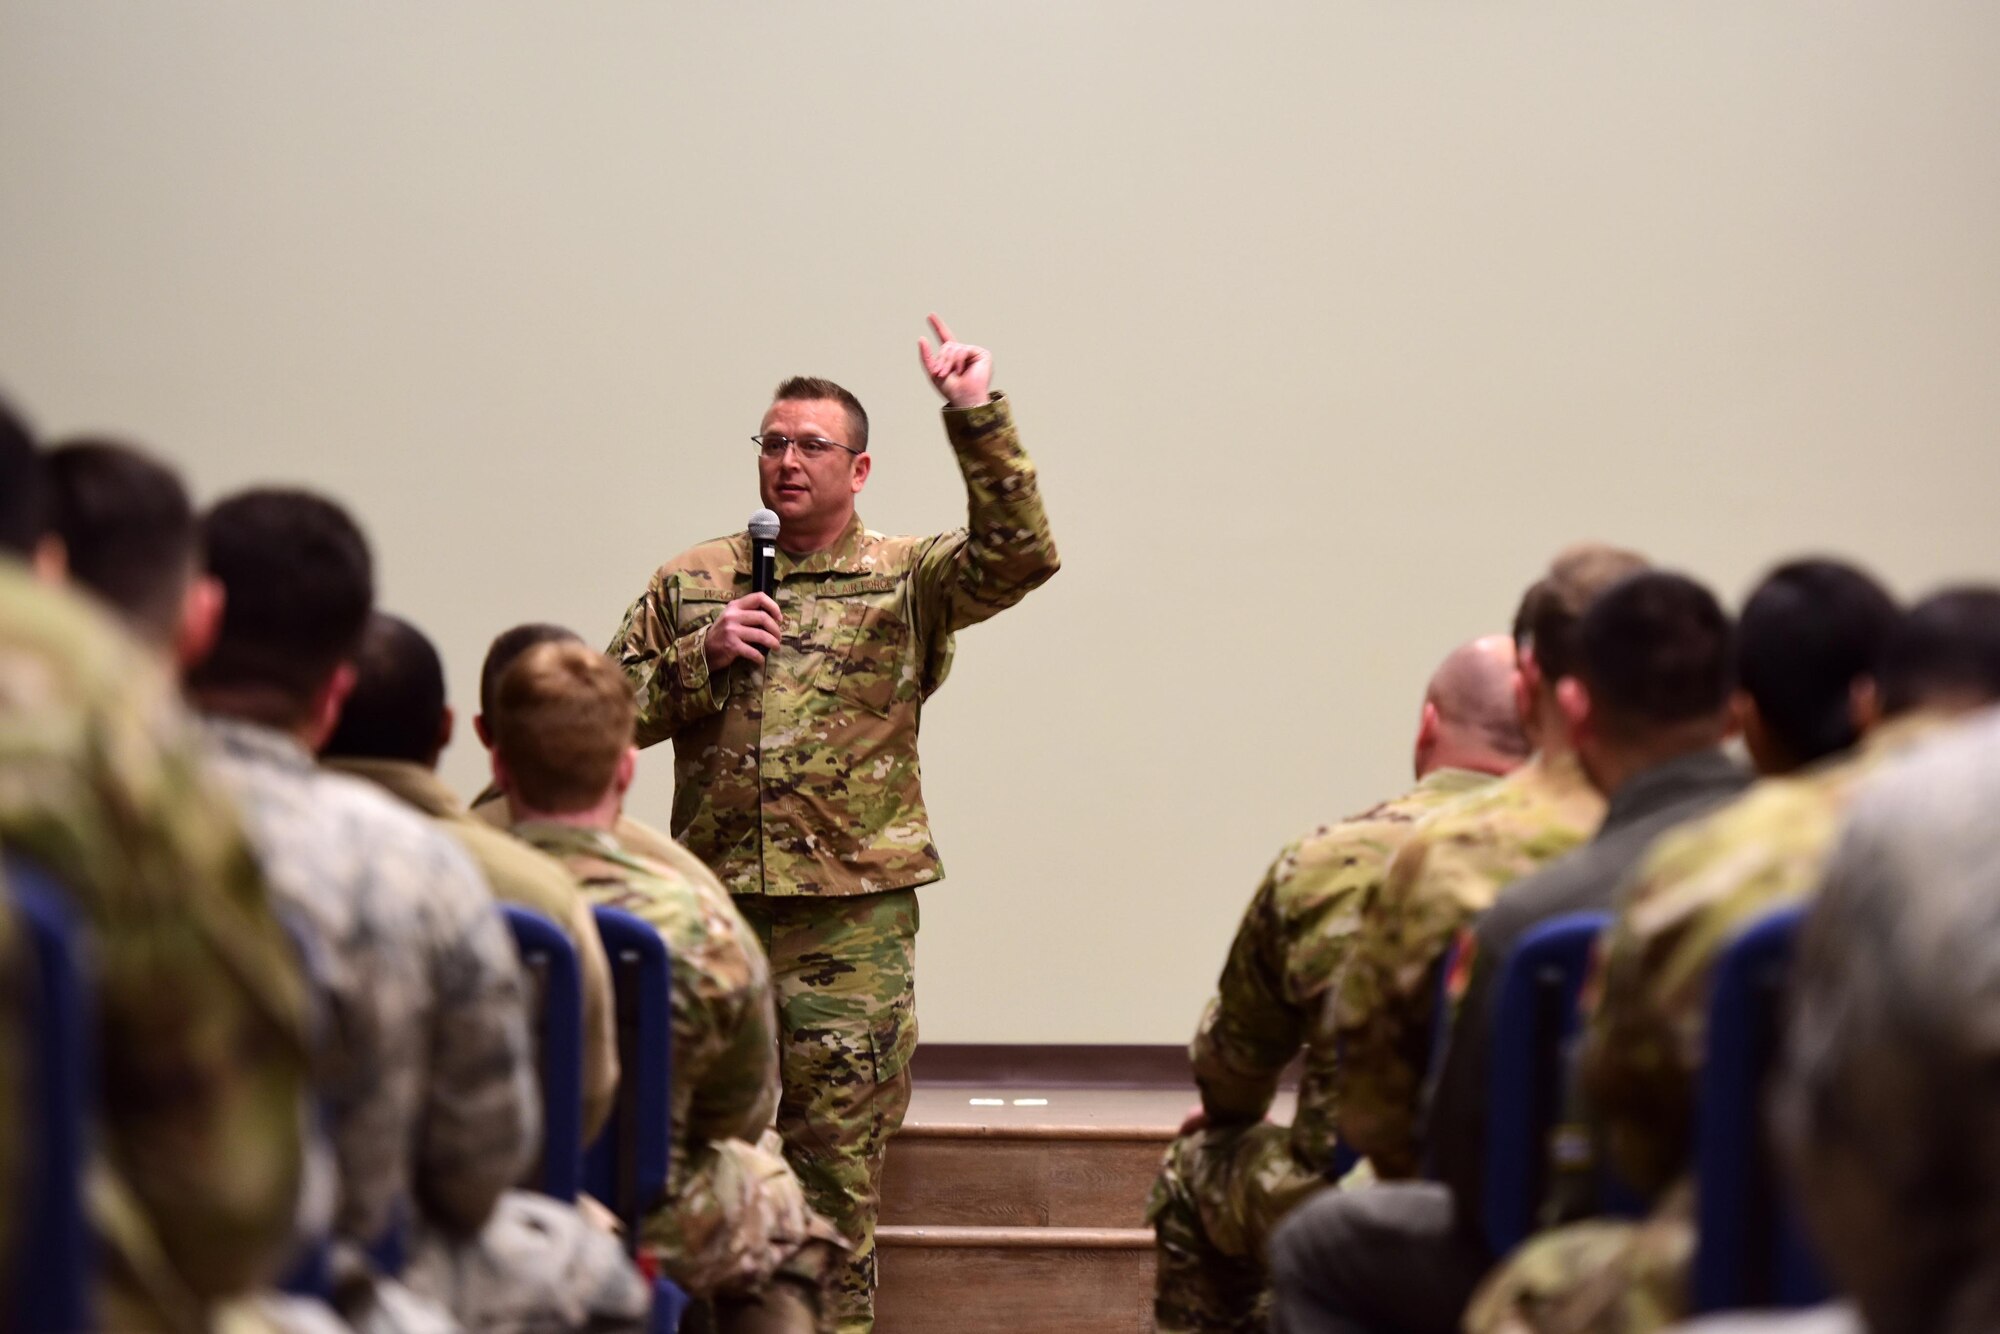 Chief Master Sergeant David Wade, Command Chief of Air Combat Command, speaks with Airmen in an all-call at Creech Air Force Base.